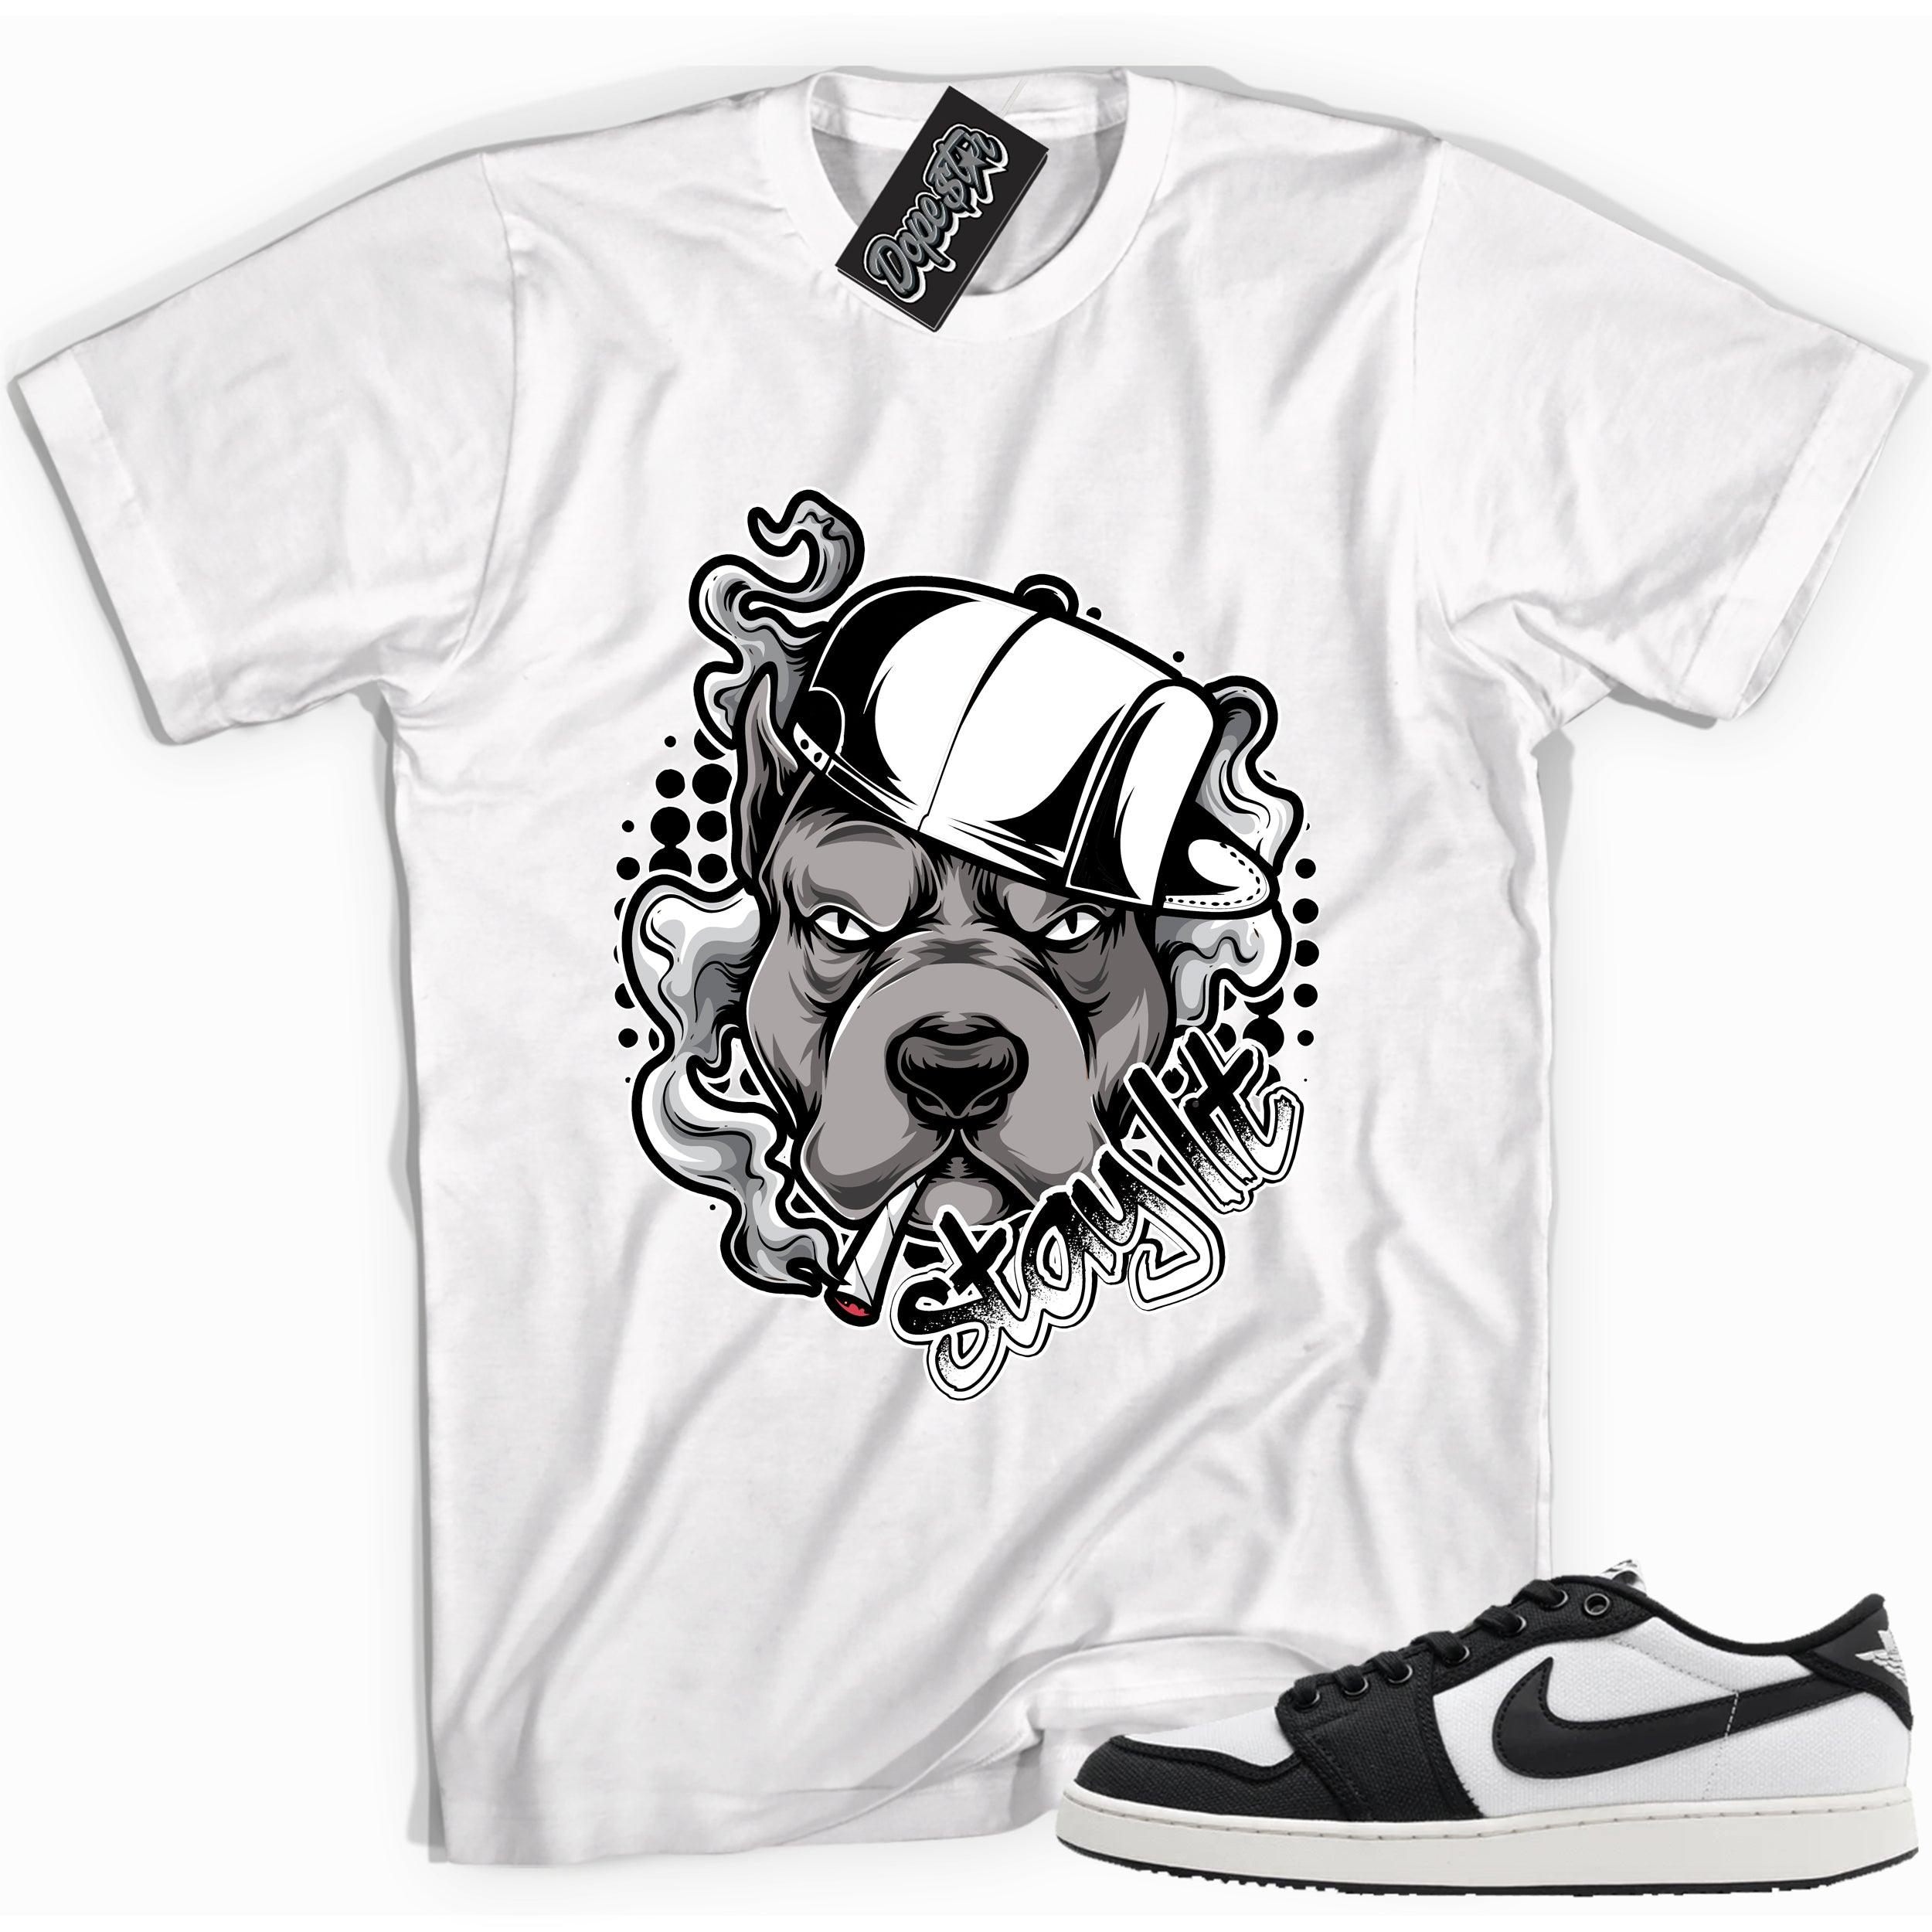 Cool white graphic tee with 'stay lit' print, that perfectly matches Air Jordan 1 Retro Ajko Low Black & White sneakers.